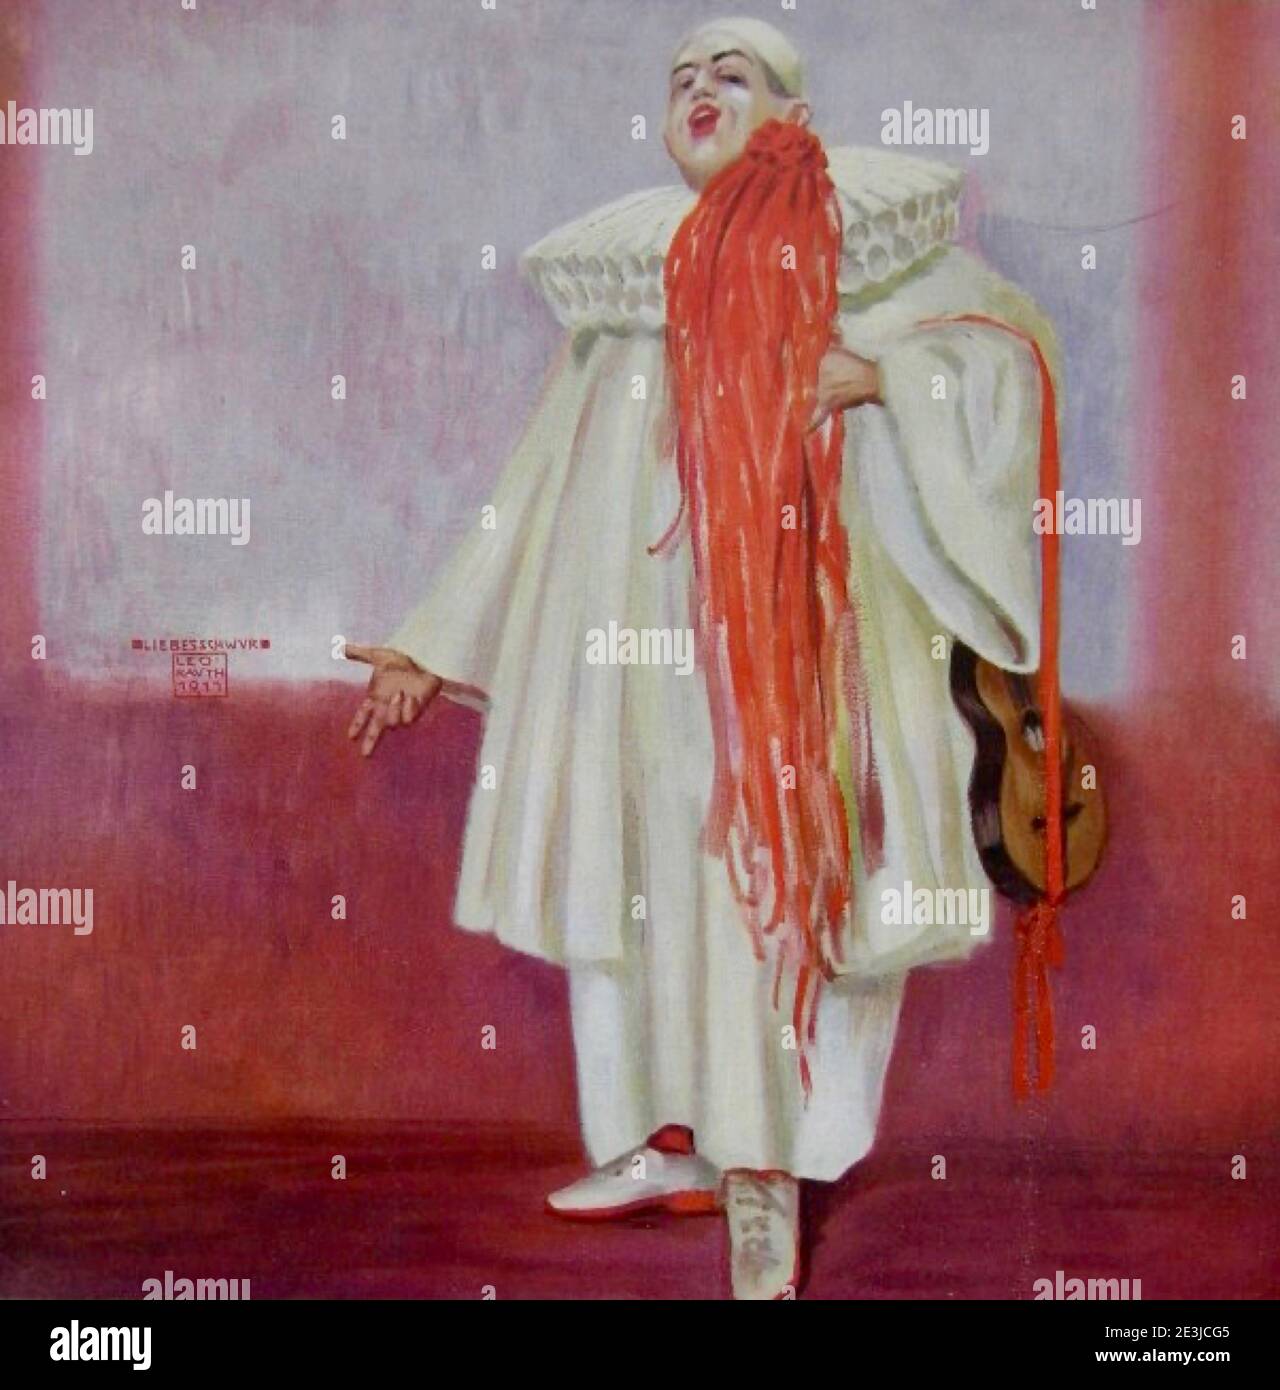 Artwork by Leo Rauth called Liebesschwur. A clown in white and red costume pledges his love. Copy space to add message of love. Stock Photo